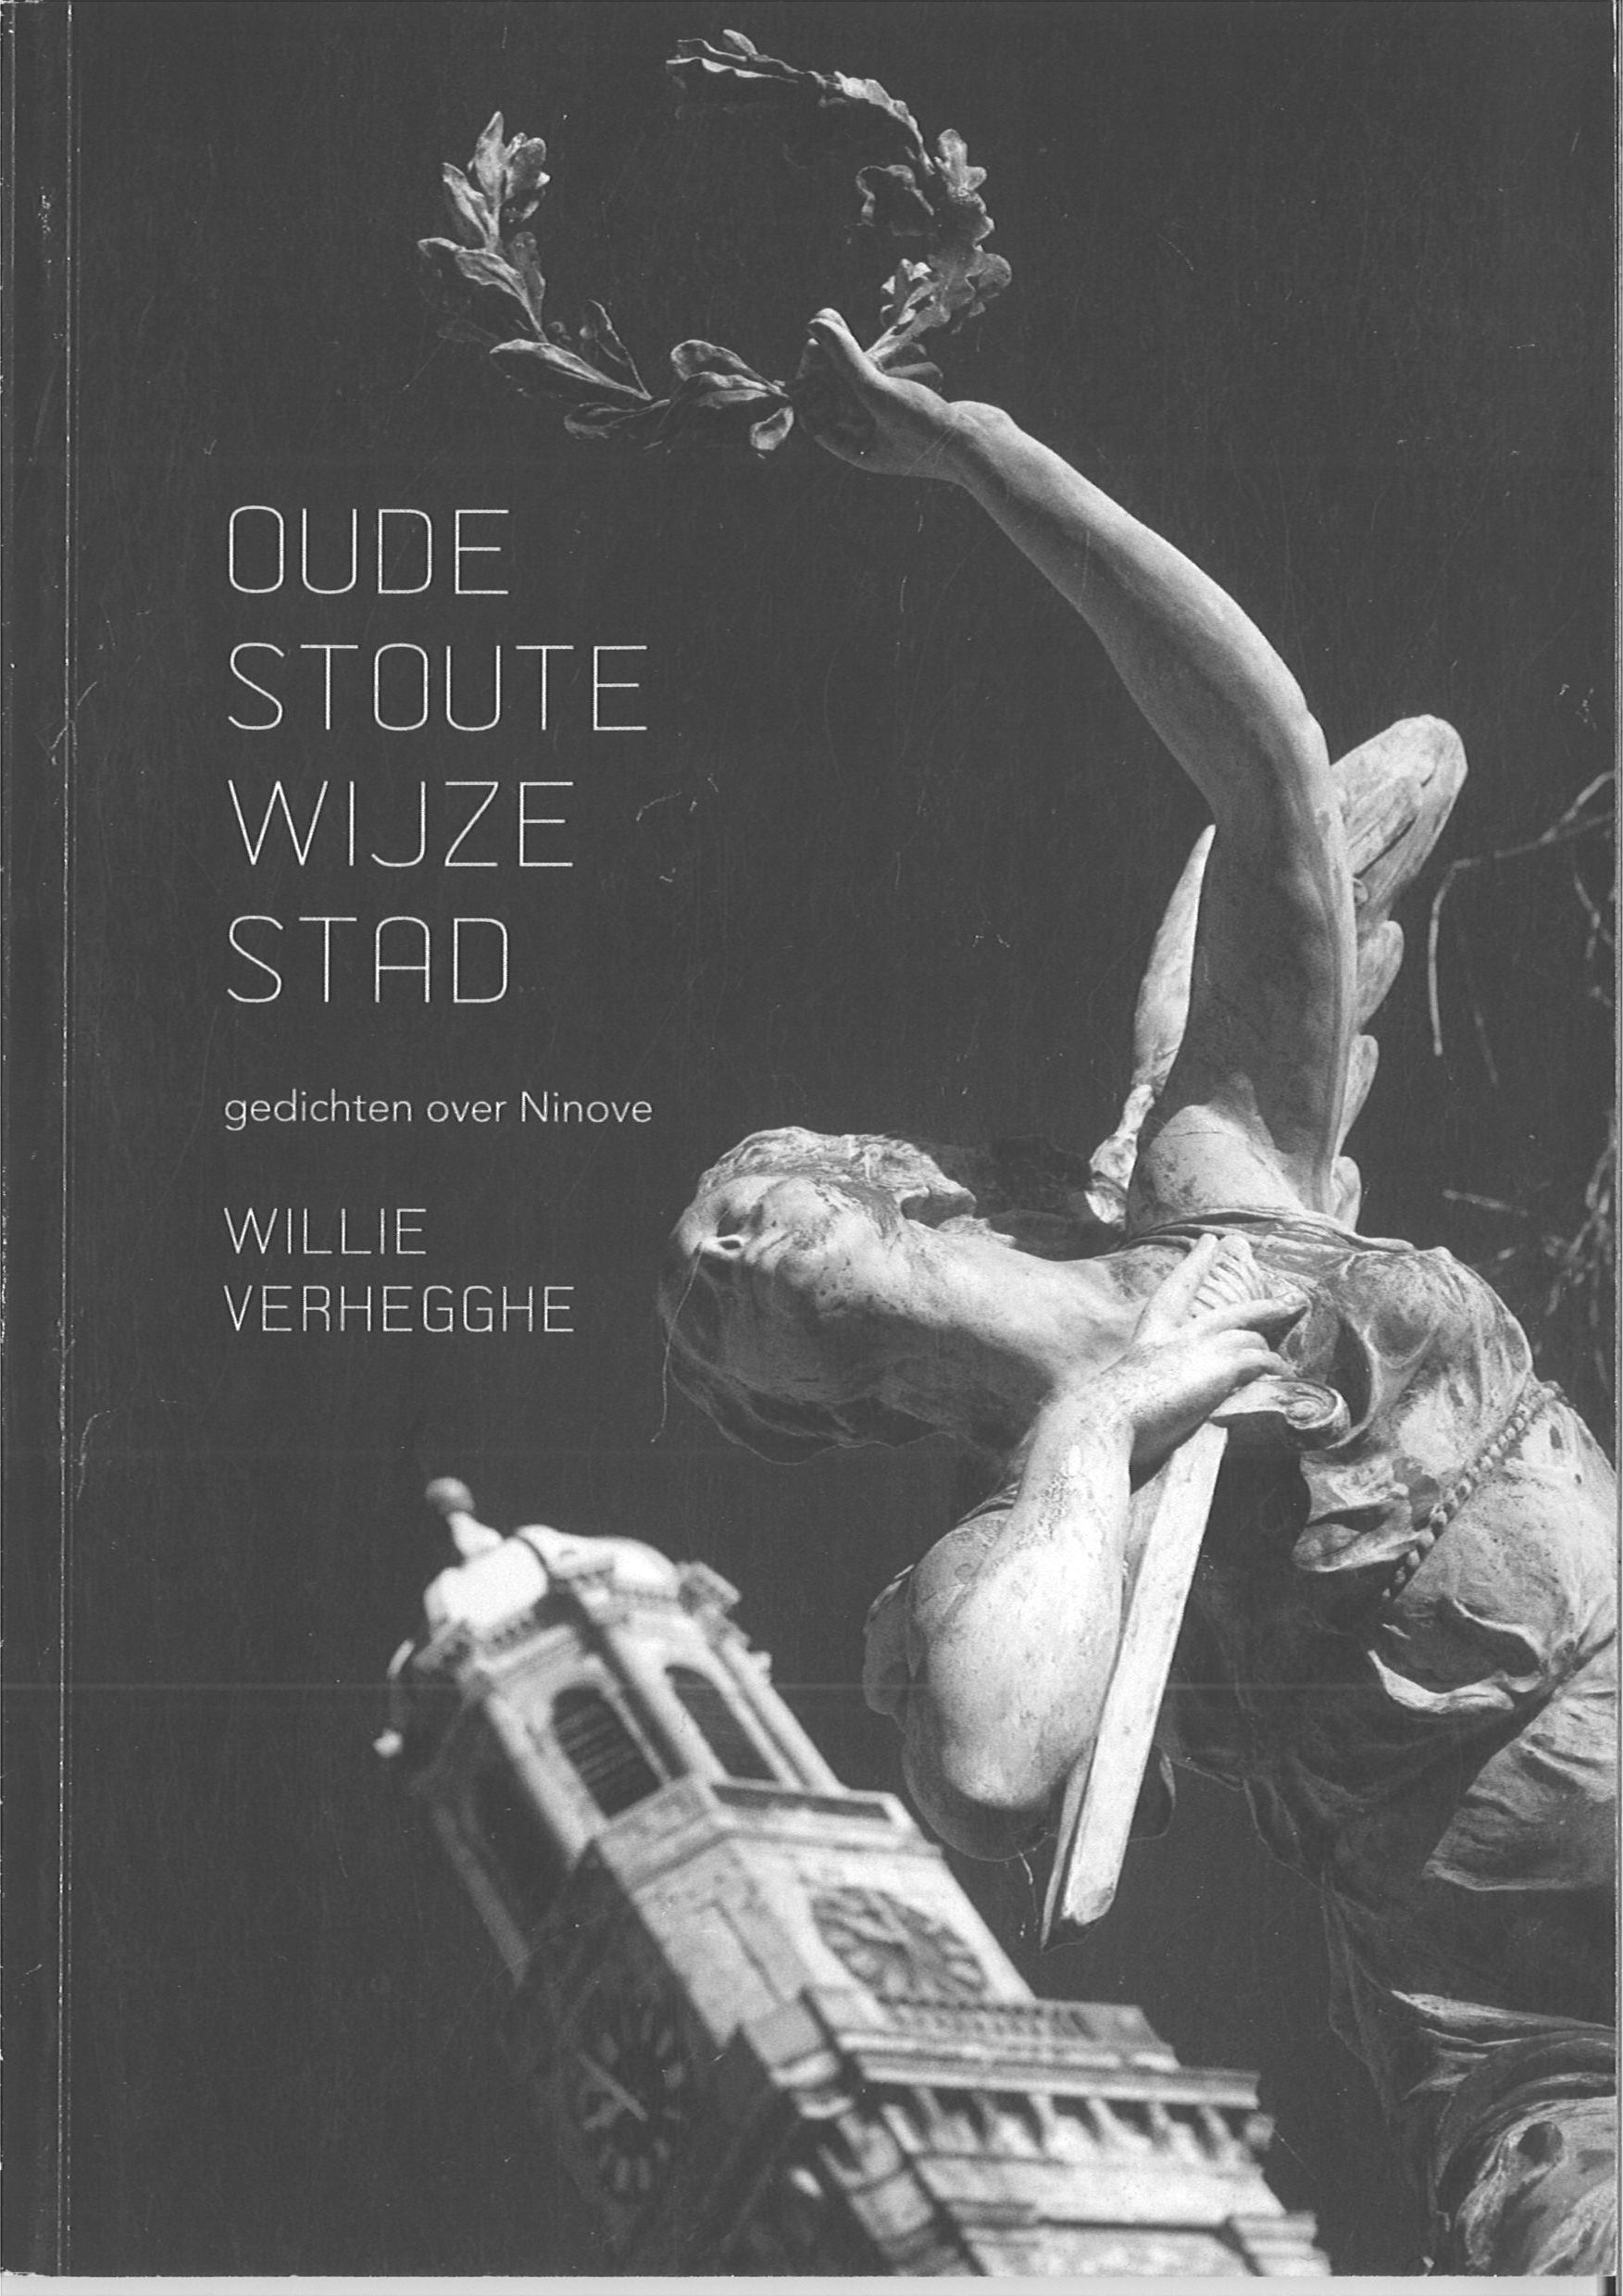 Oude stoute wijze stad